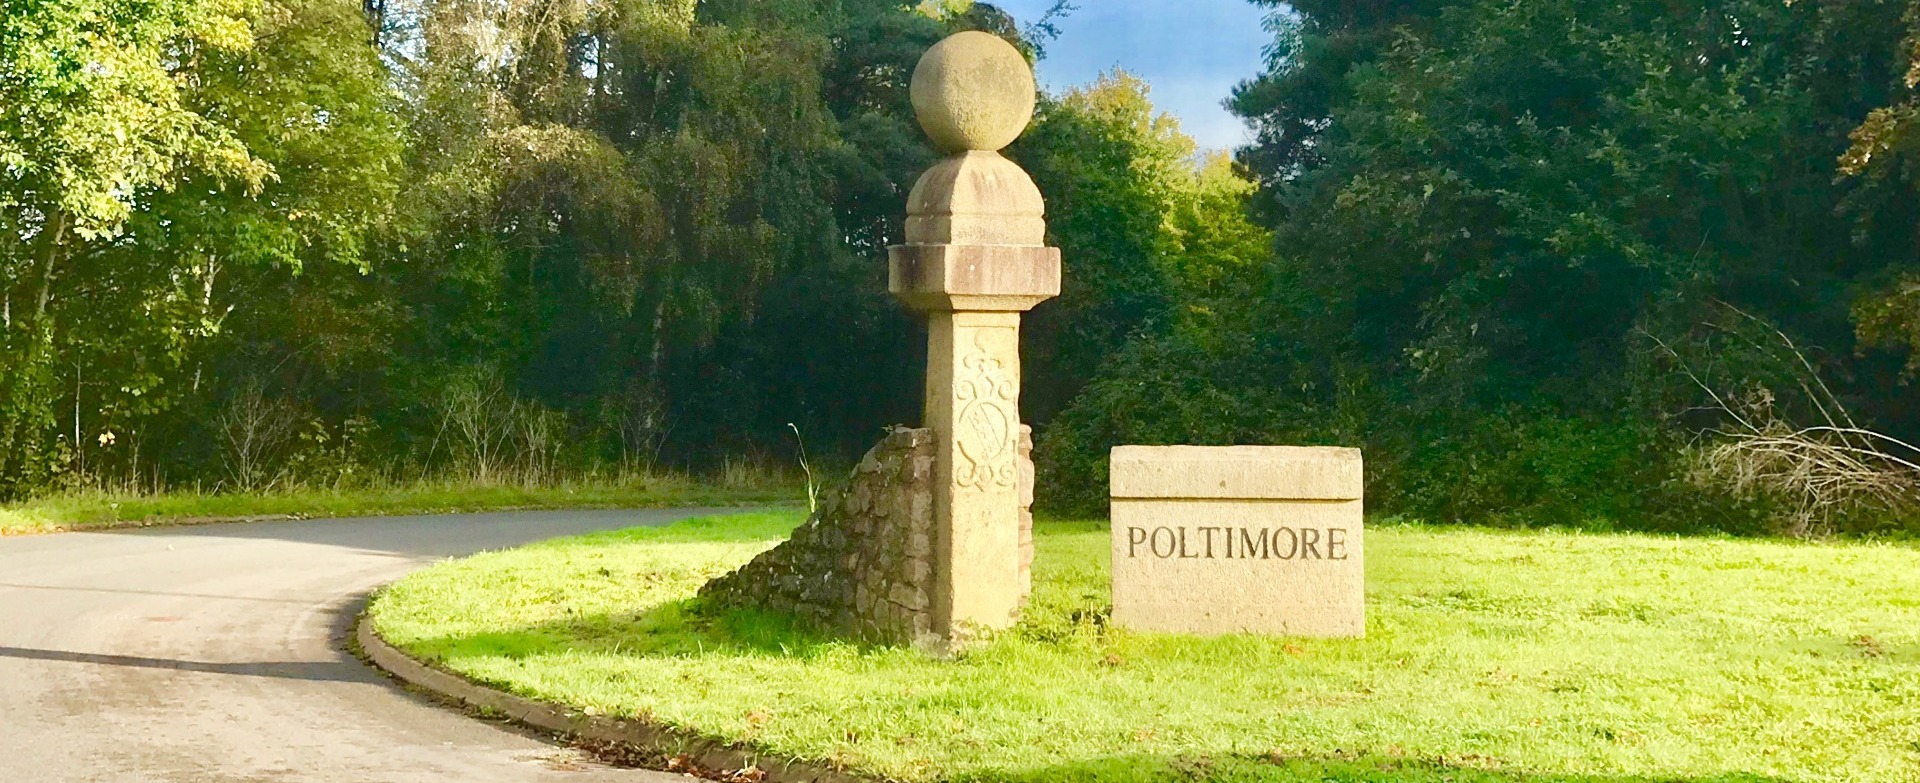 Entrance to Poltimore Village stone engraved sign